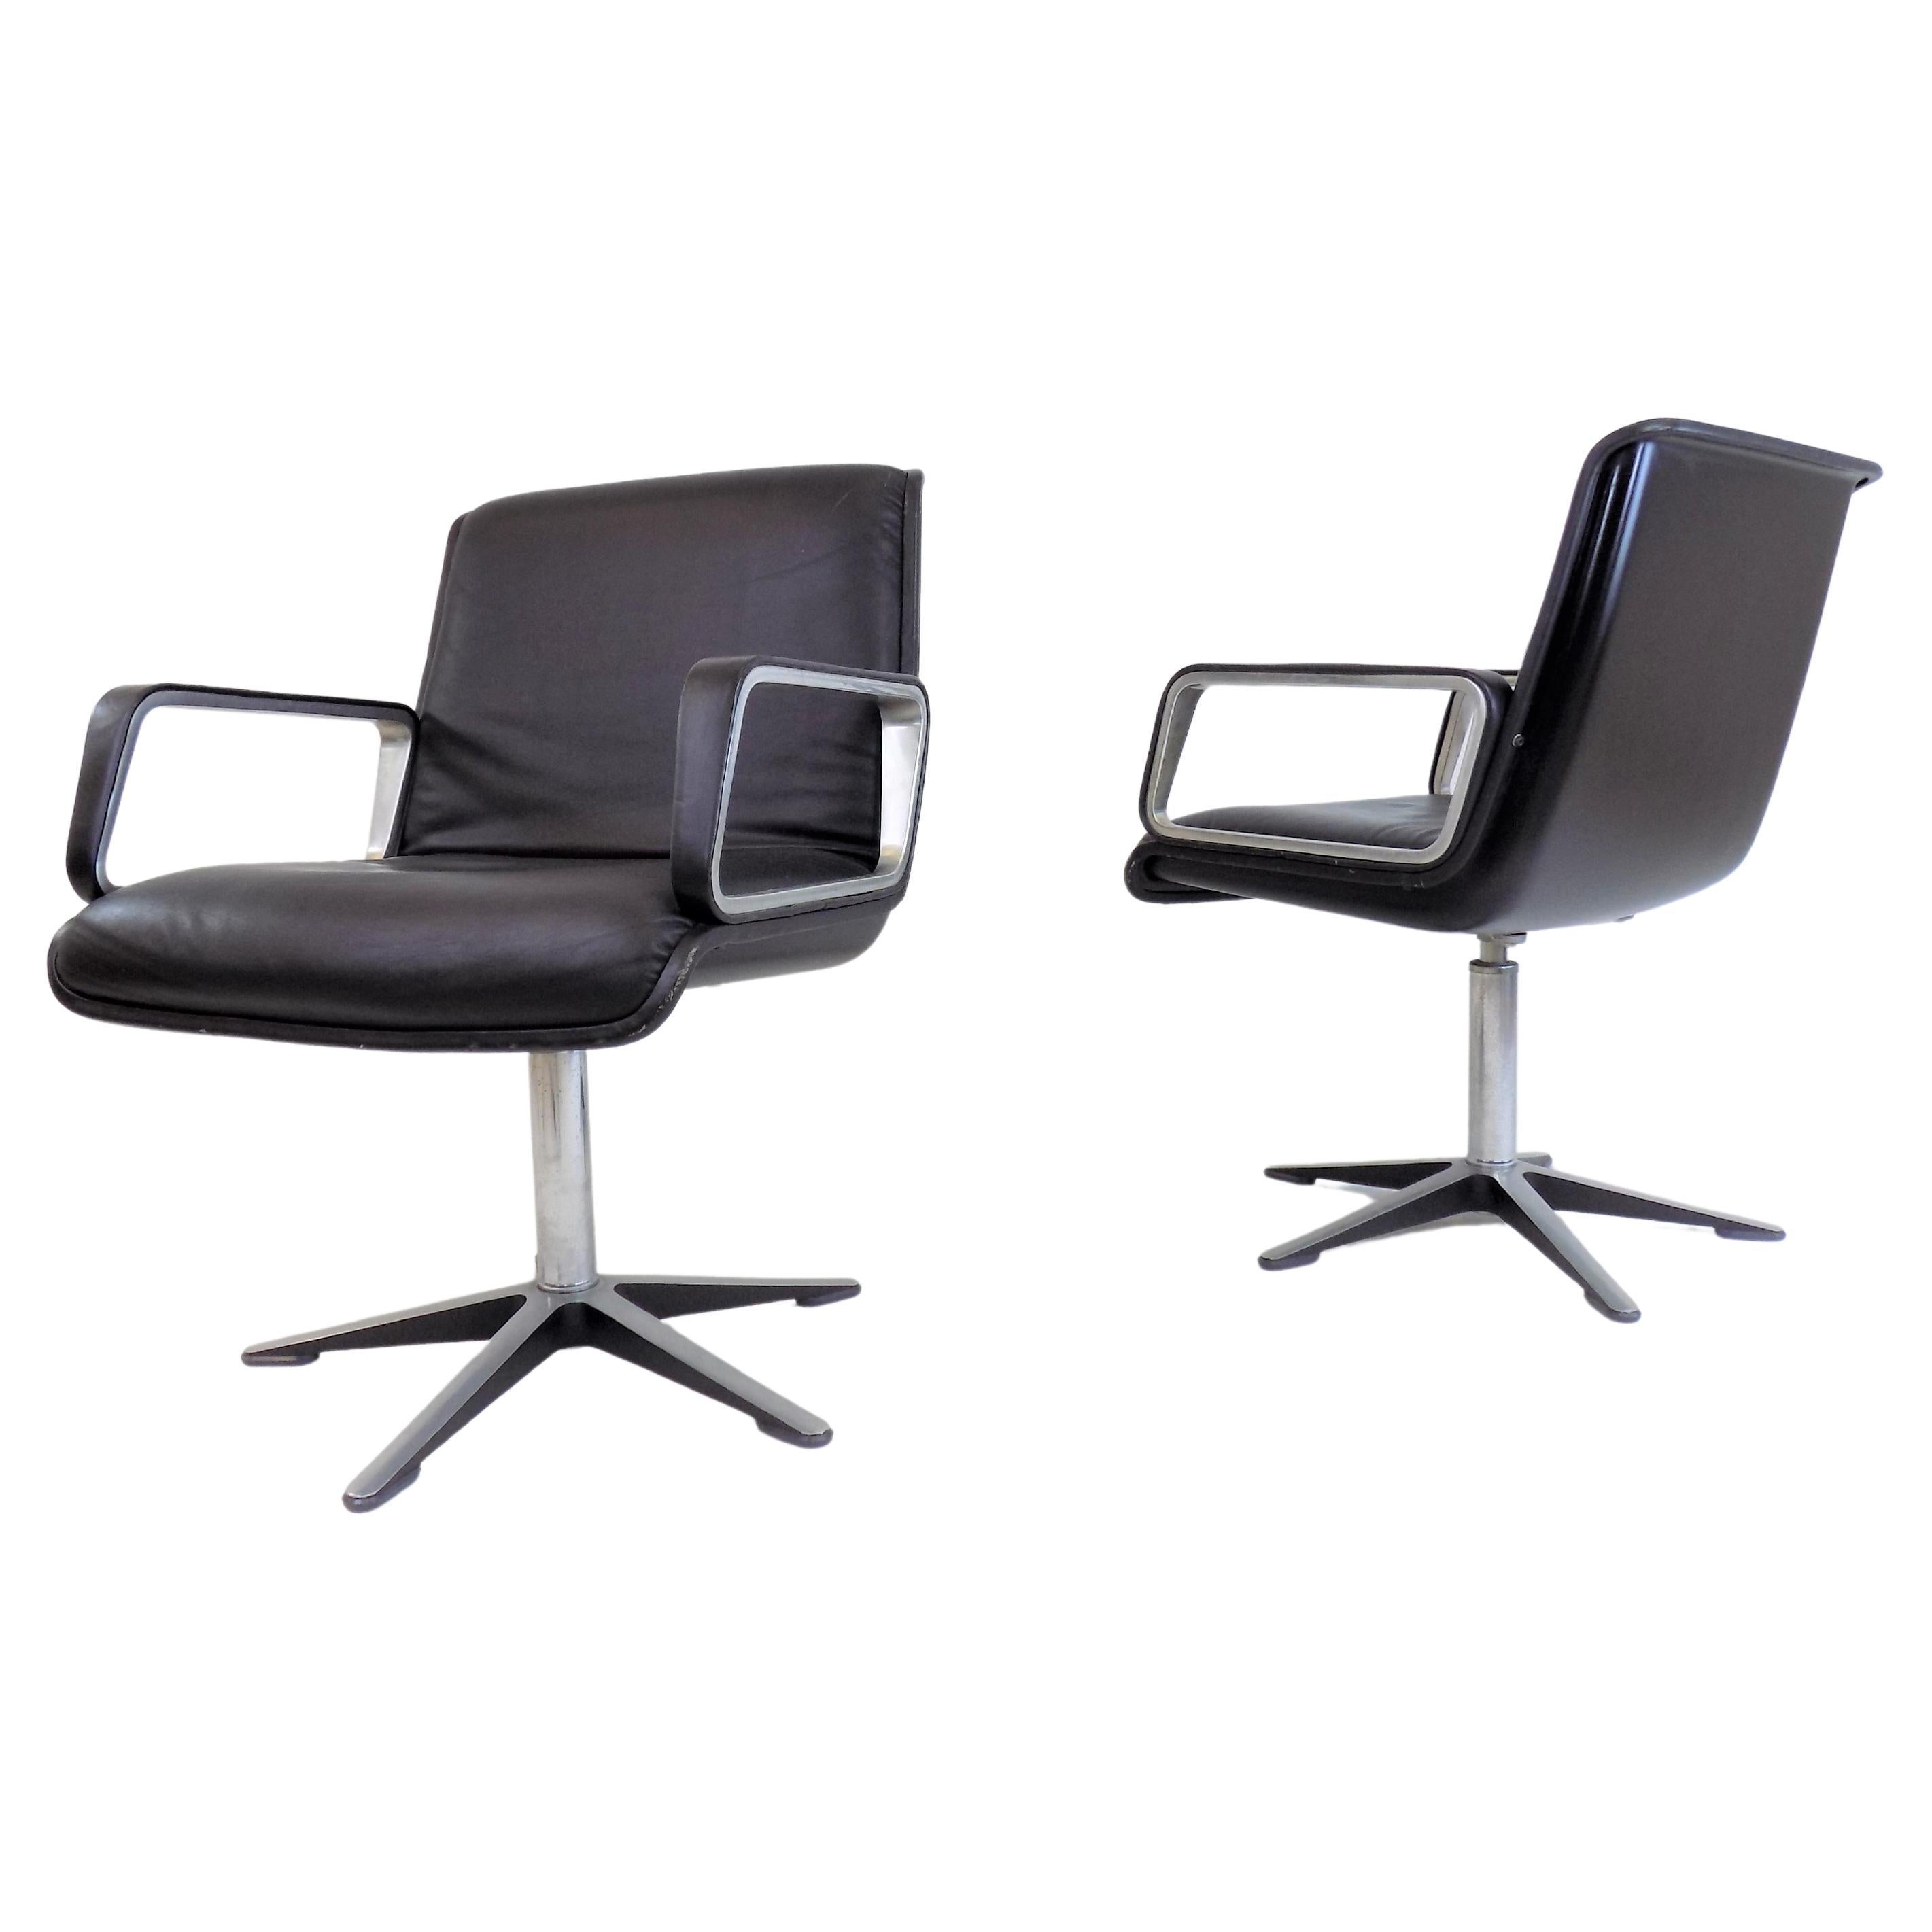 Wilkhahn Delta set of 2 dining/conference chairs from Delta Group